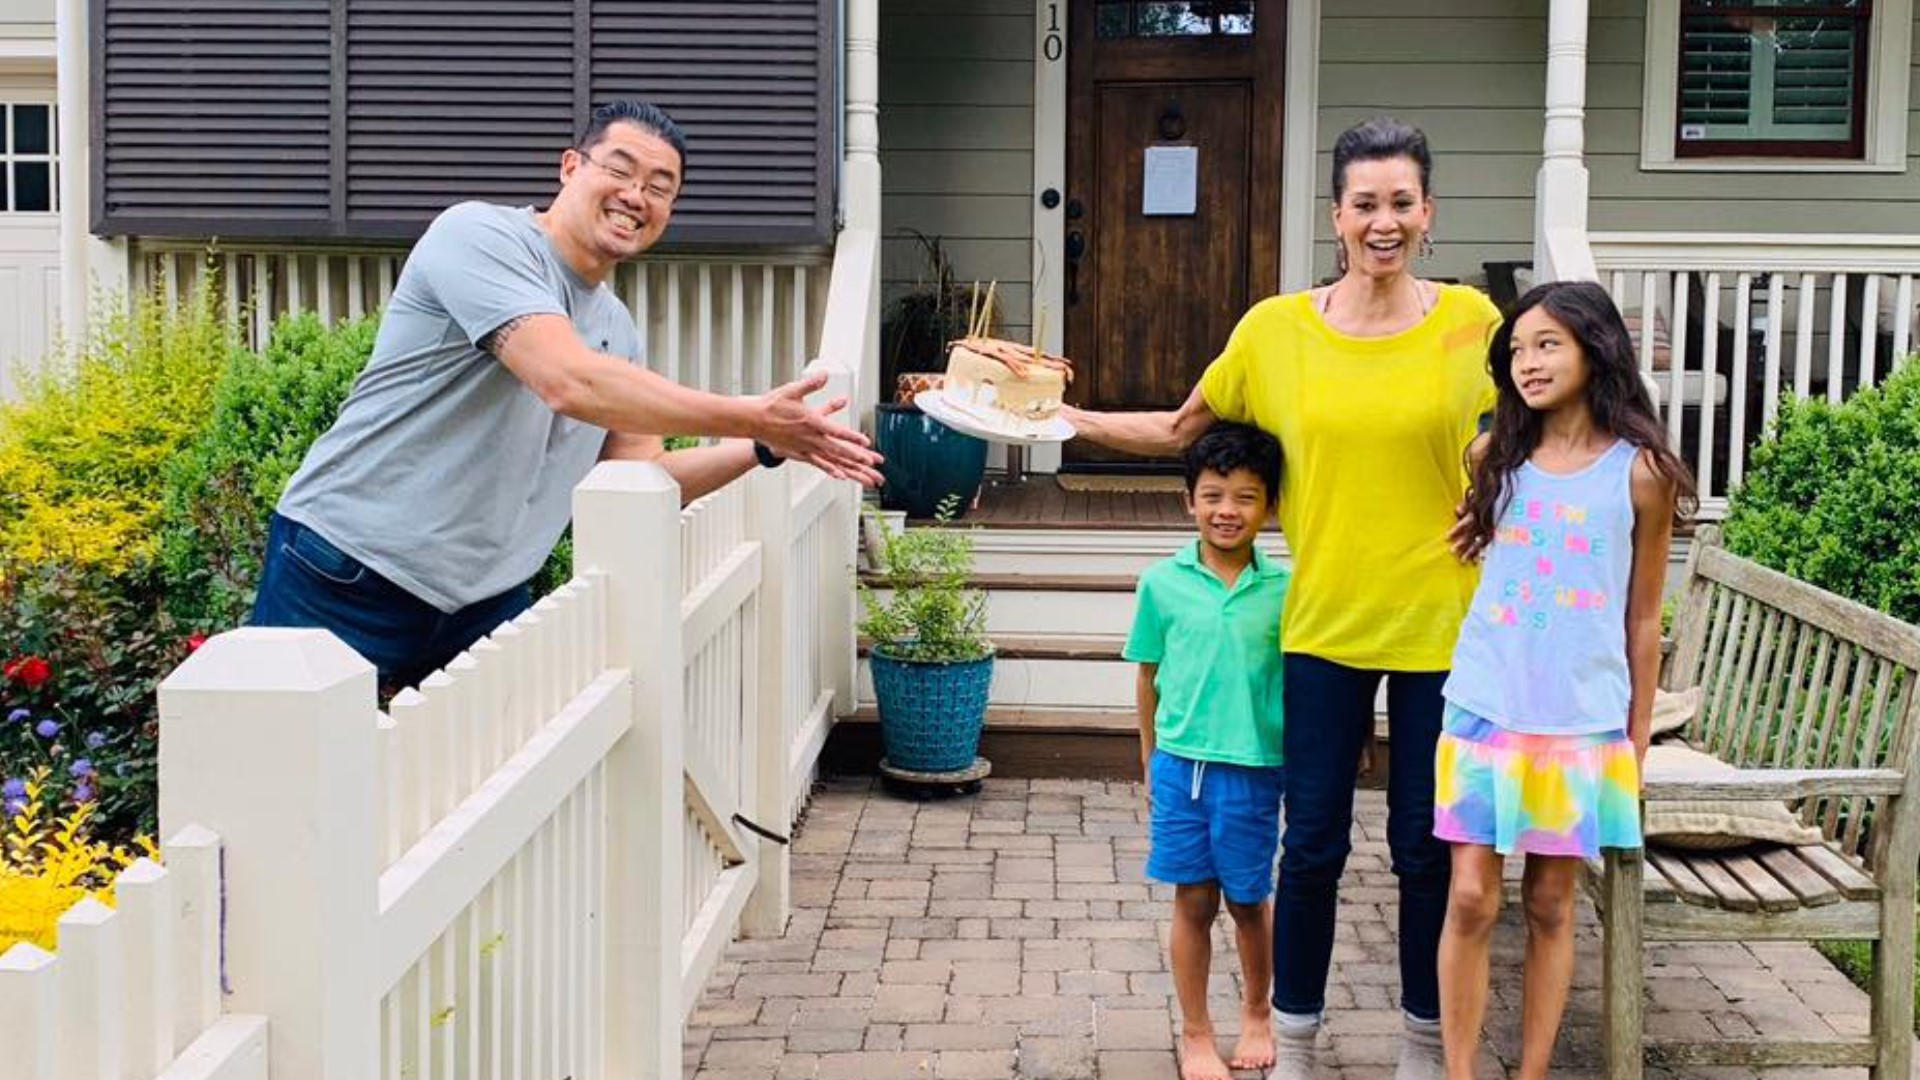 Being a doctor and around COVID-positive patients every day, Dr. Franklin Lin chose to live alone away from his family to keep them safe from the virus.